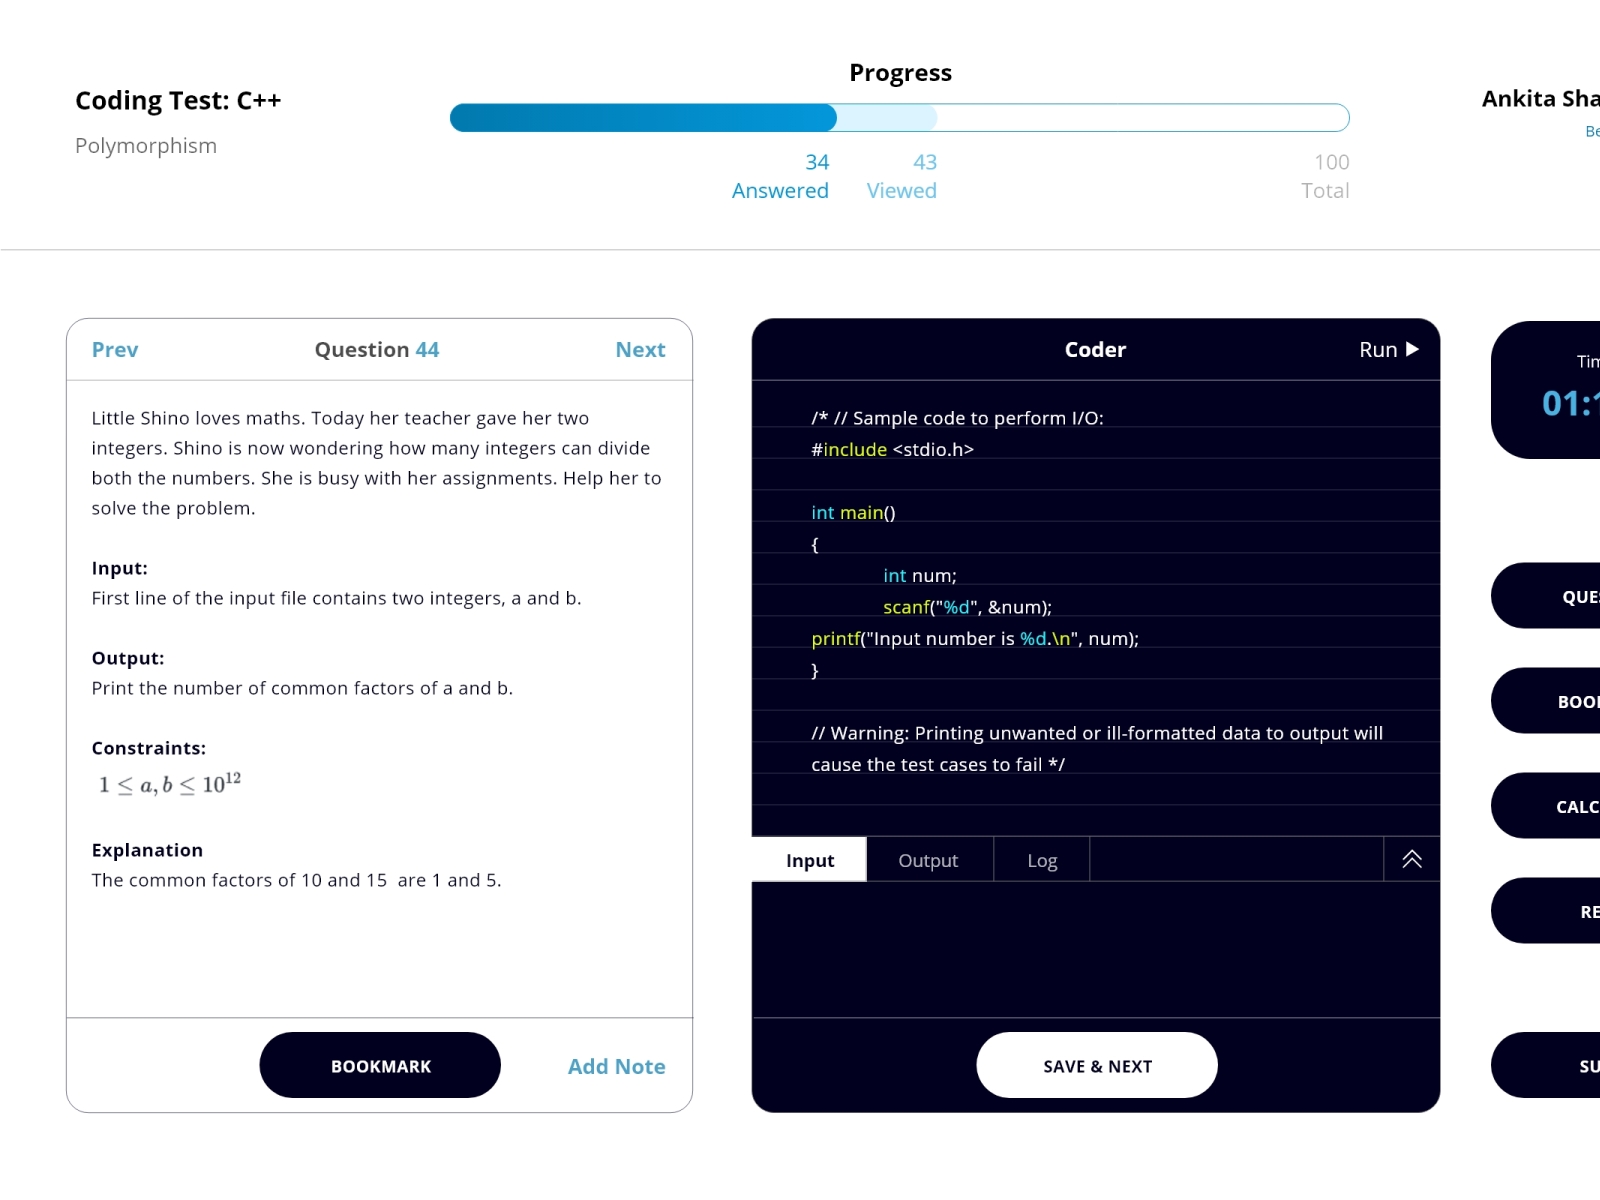 coding-test-page-for-online-education-website-by-pragathesh-ravi-on-dribbble